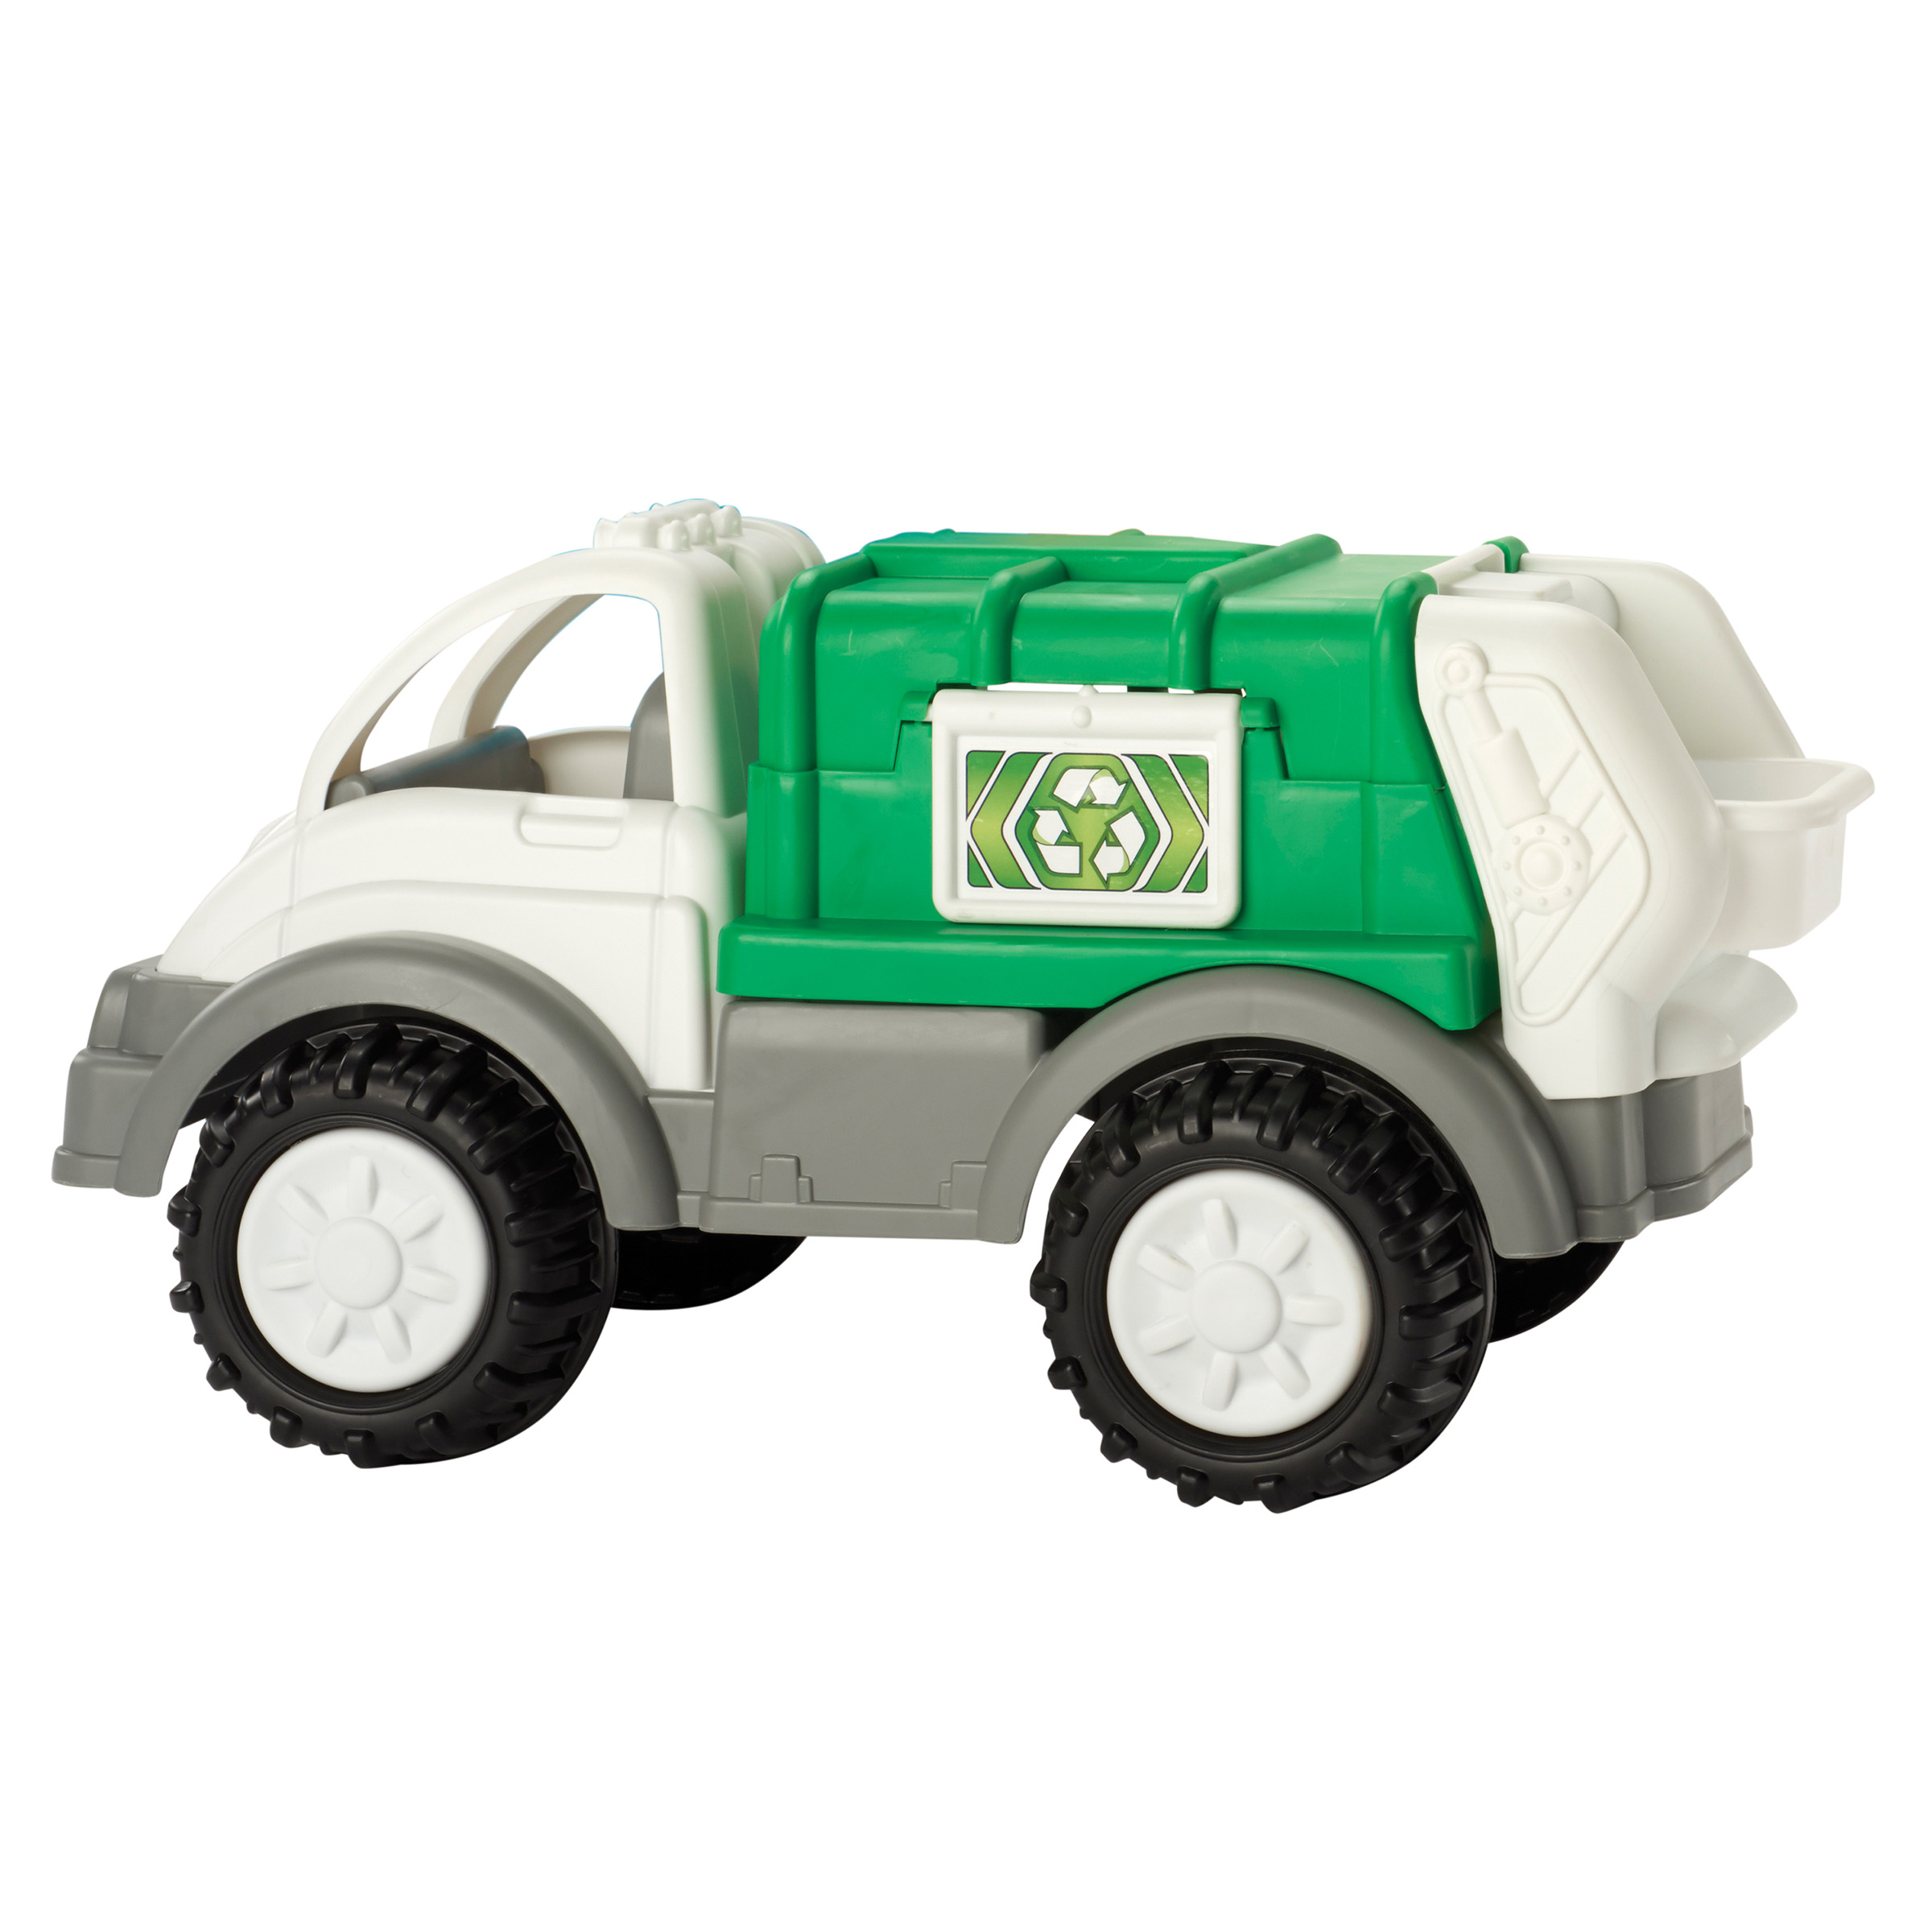 Gigantic Recycling Truck - American Plastic Toys